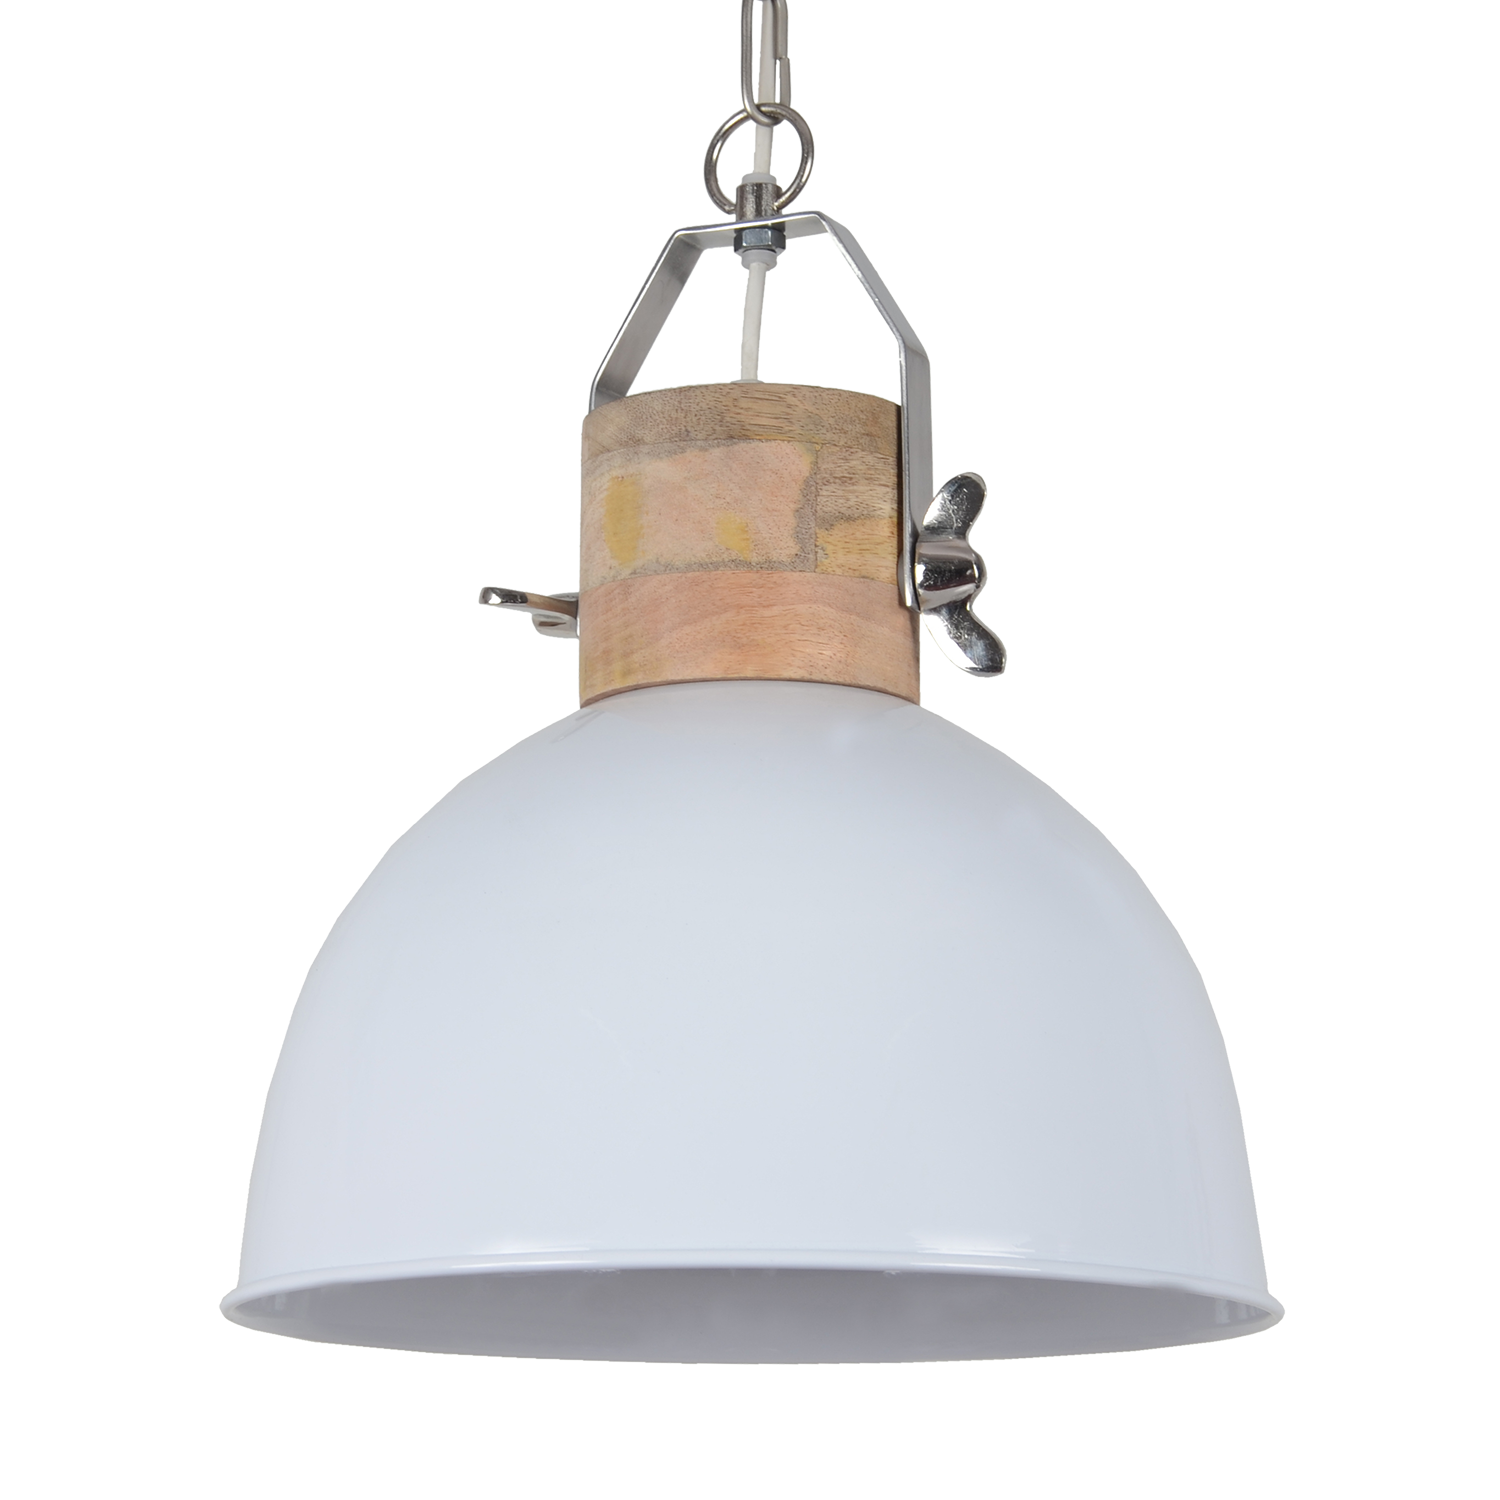 Hanglamp Fabriano 40 cm glans wit